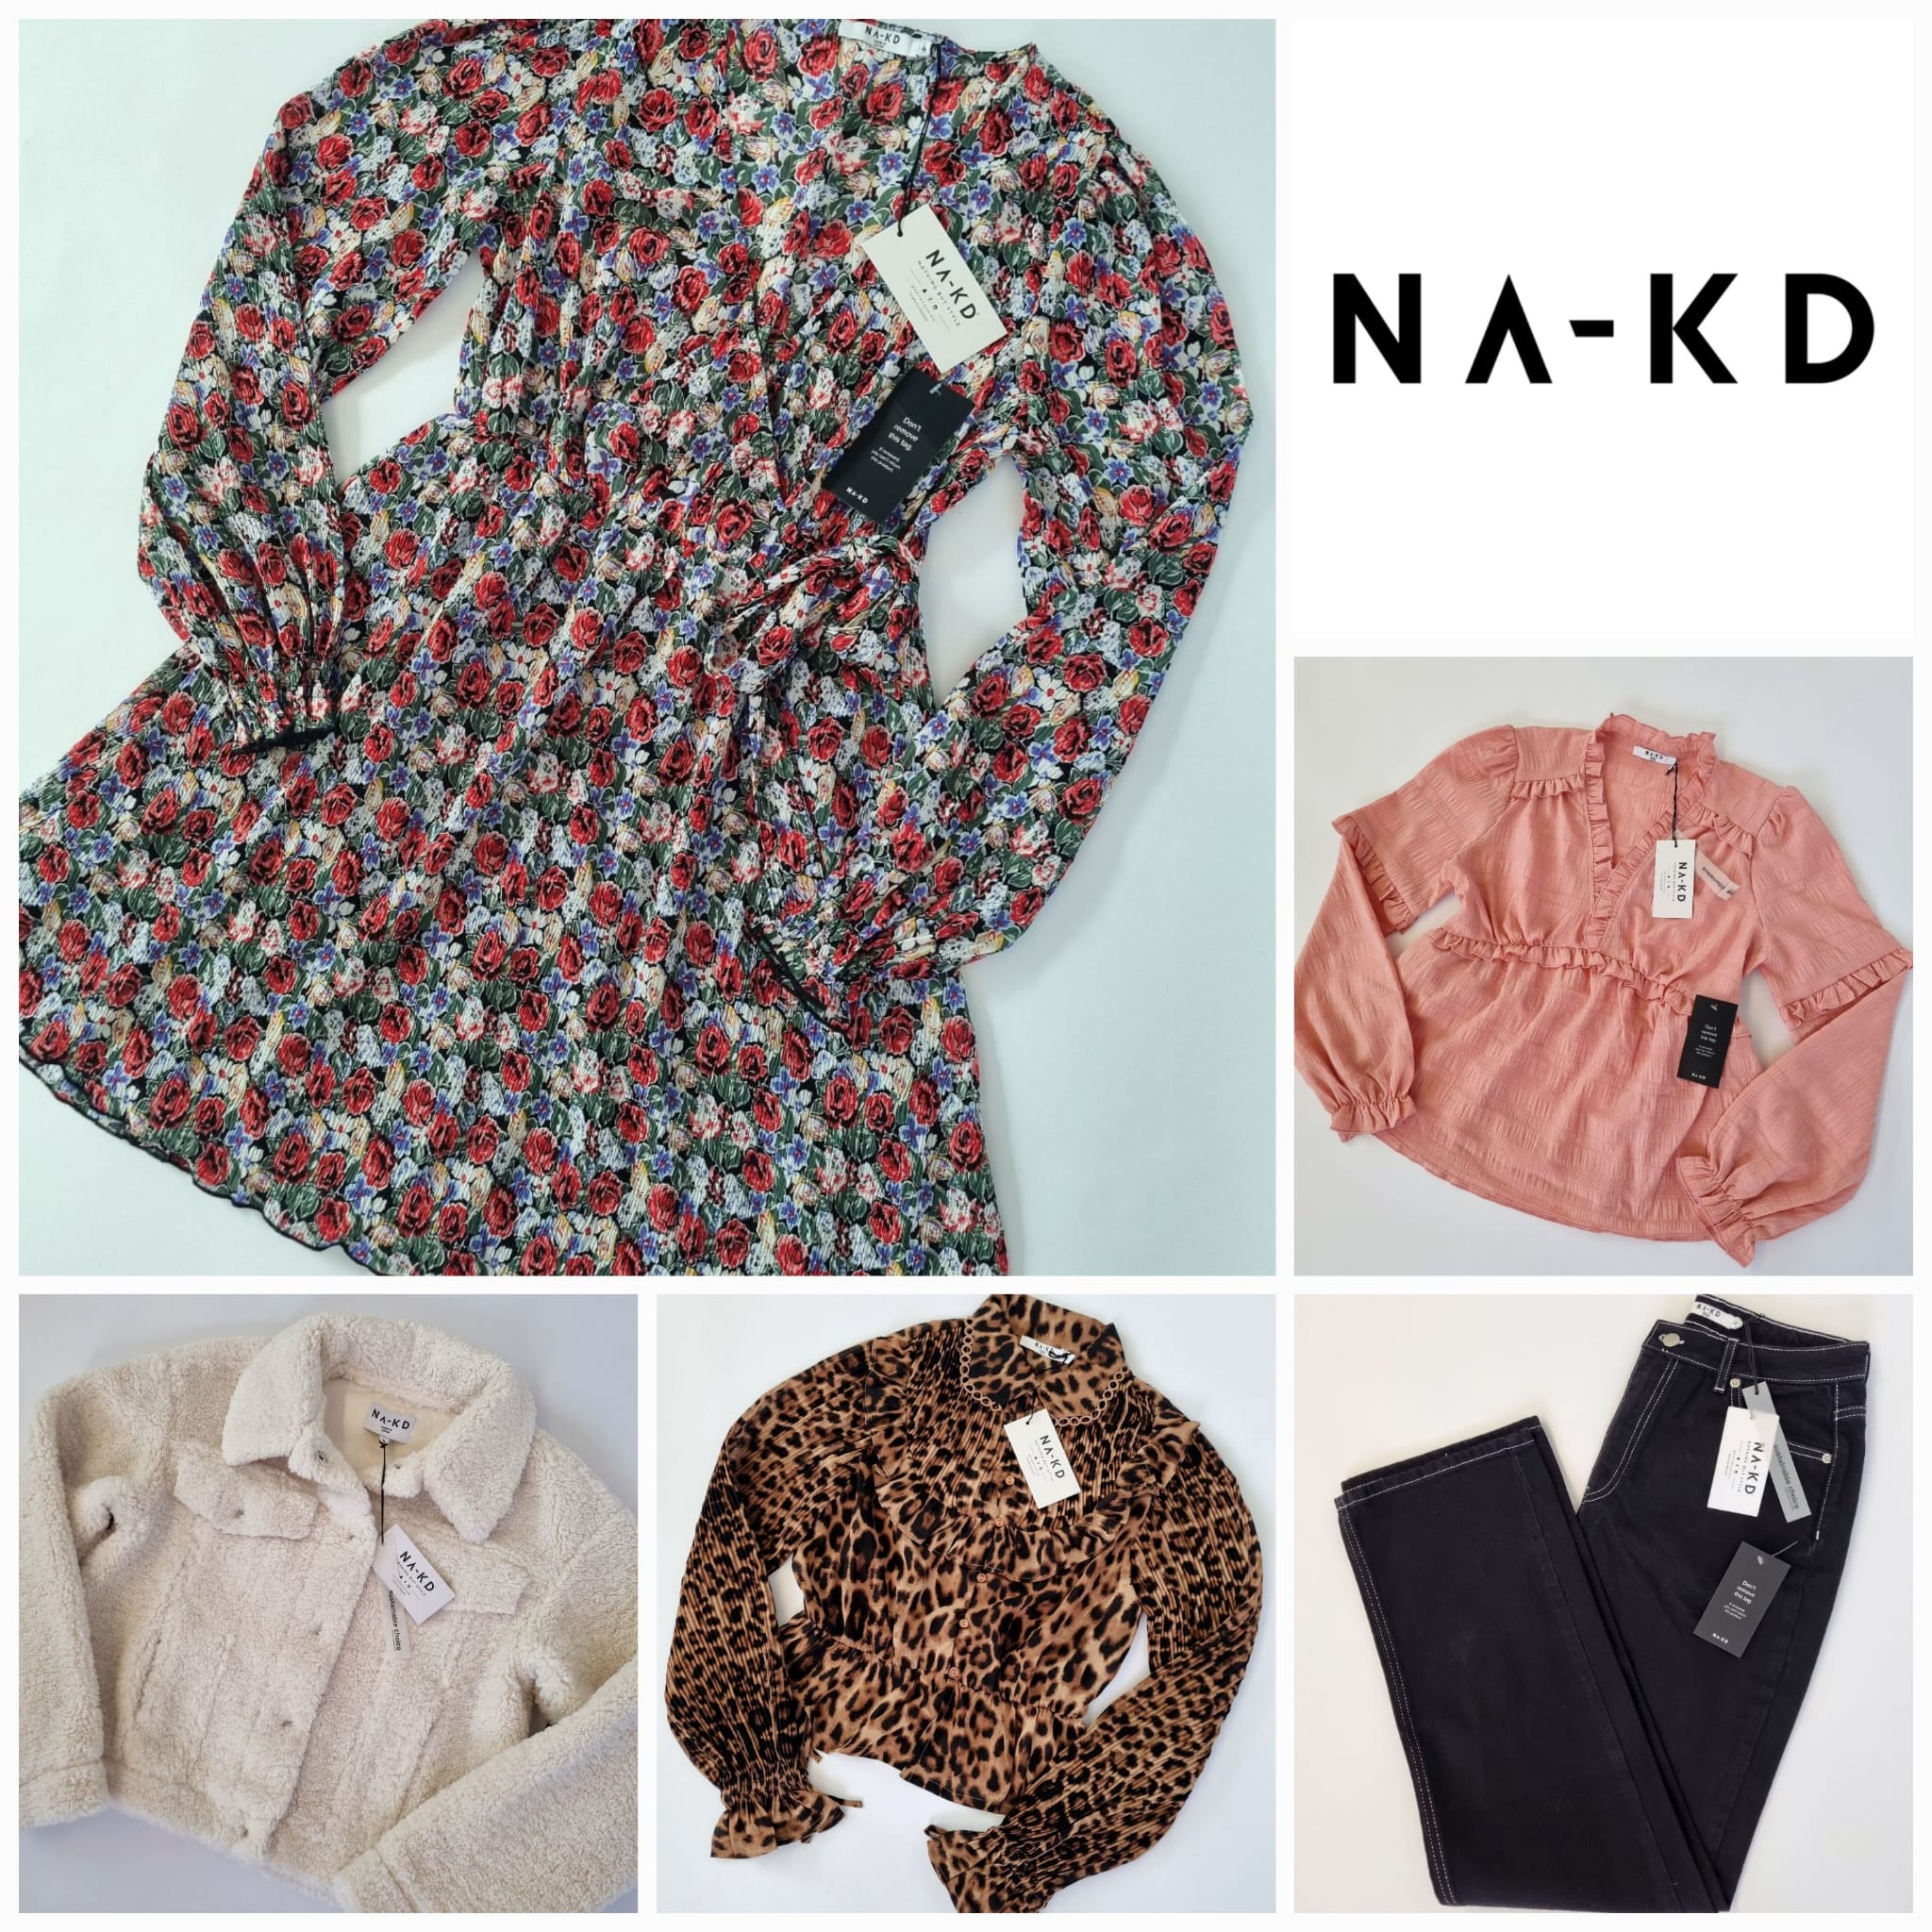 Women's clothing from NA-KD OPT